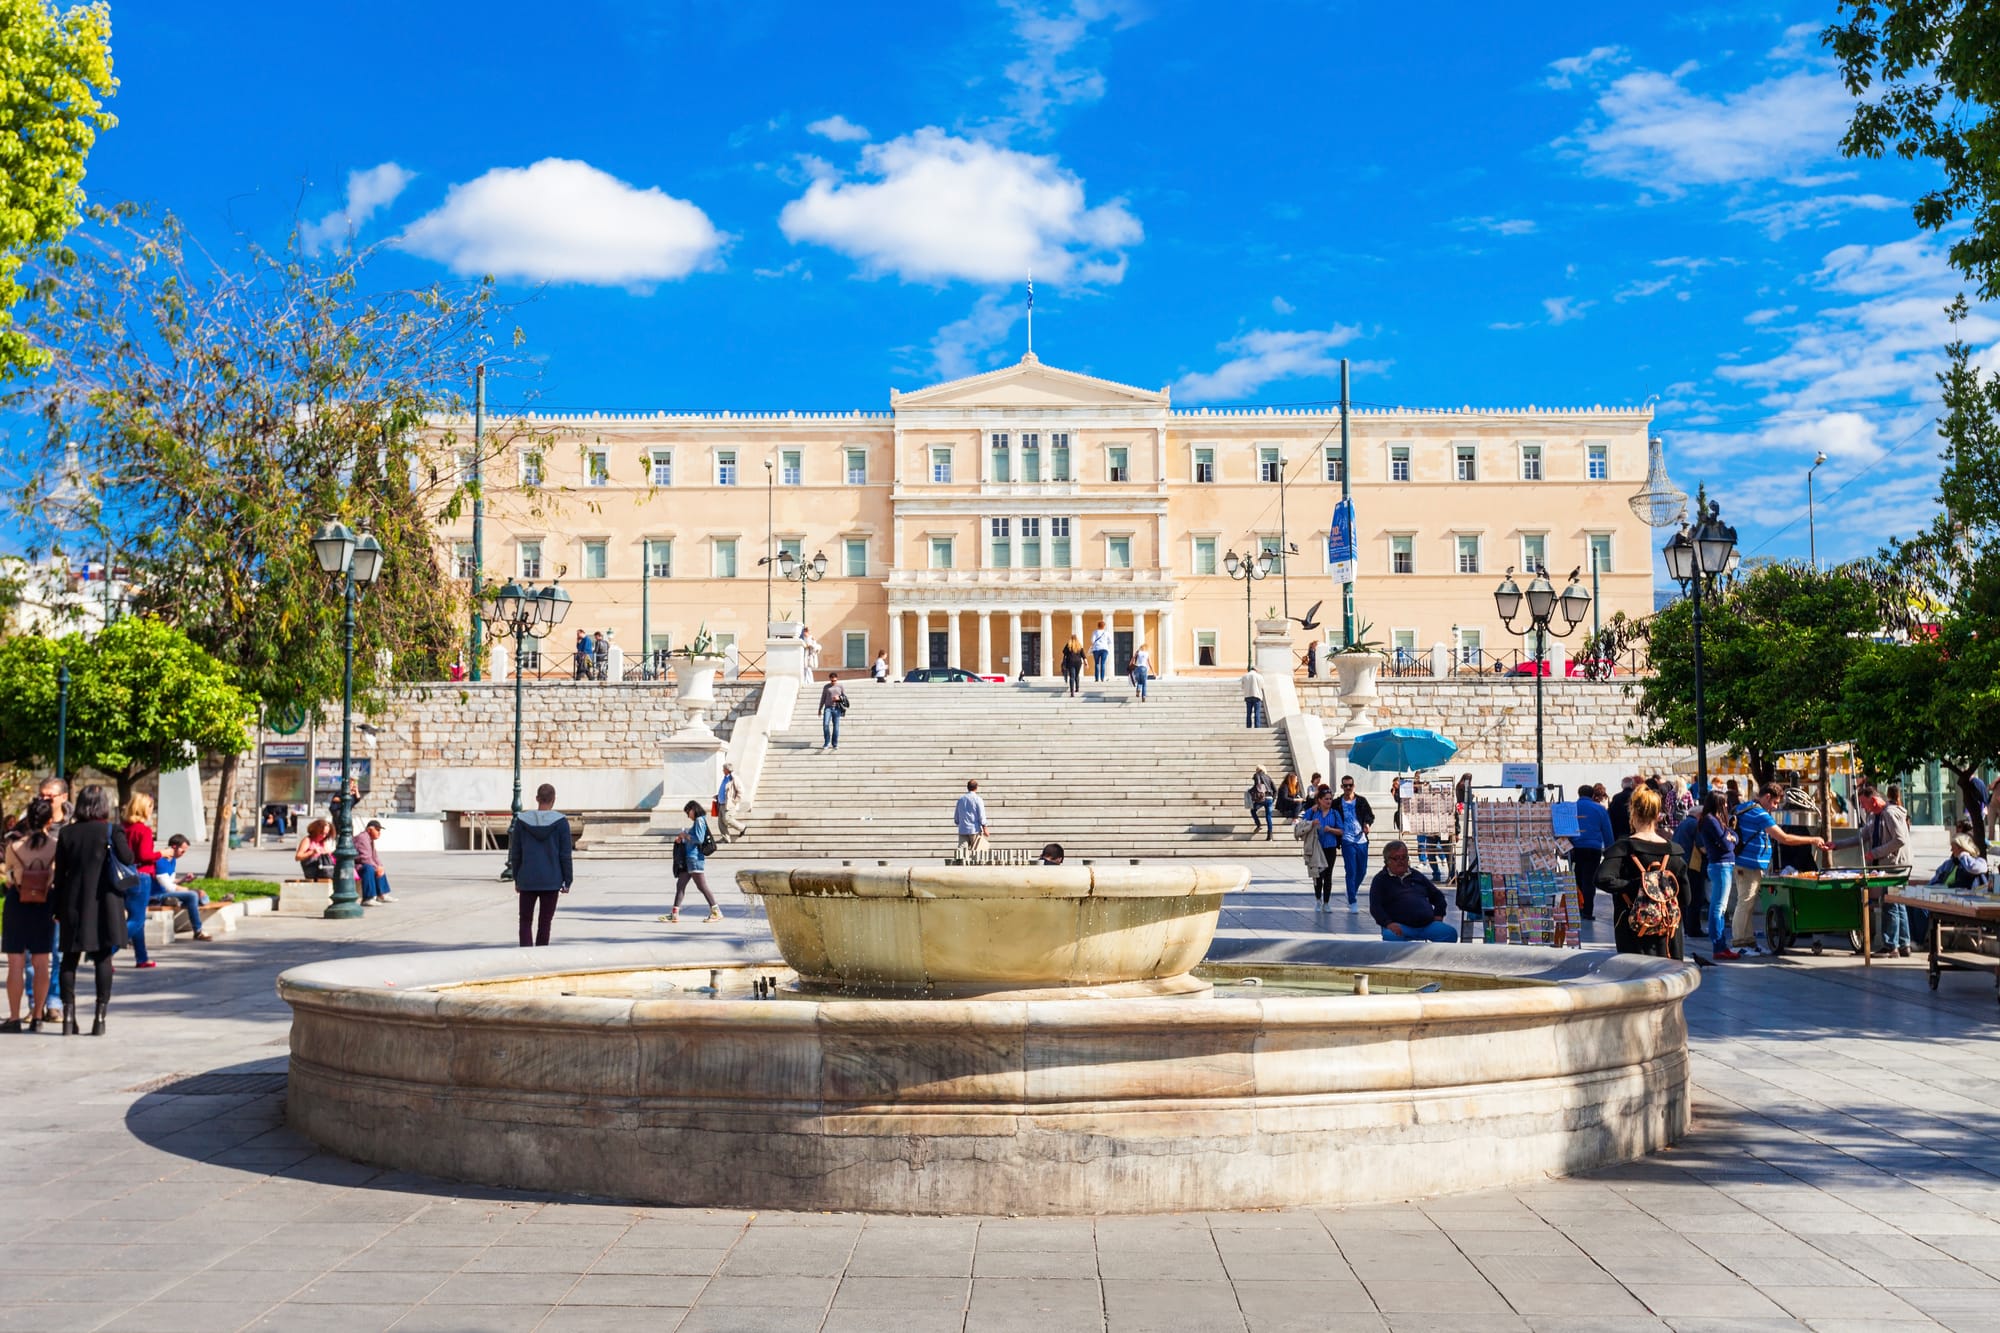 Shot of parliament building in Syntagma Square in Athens, Greece